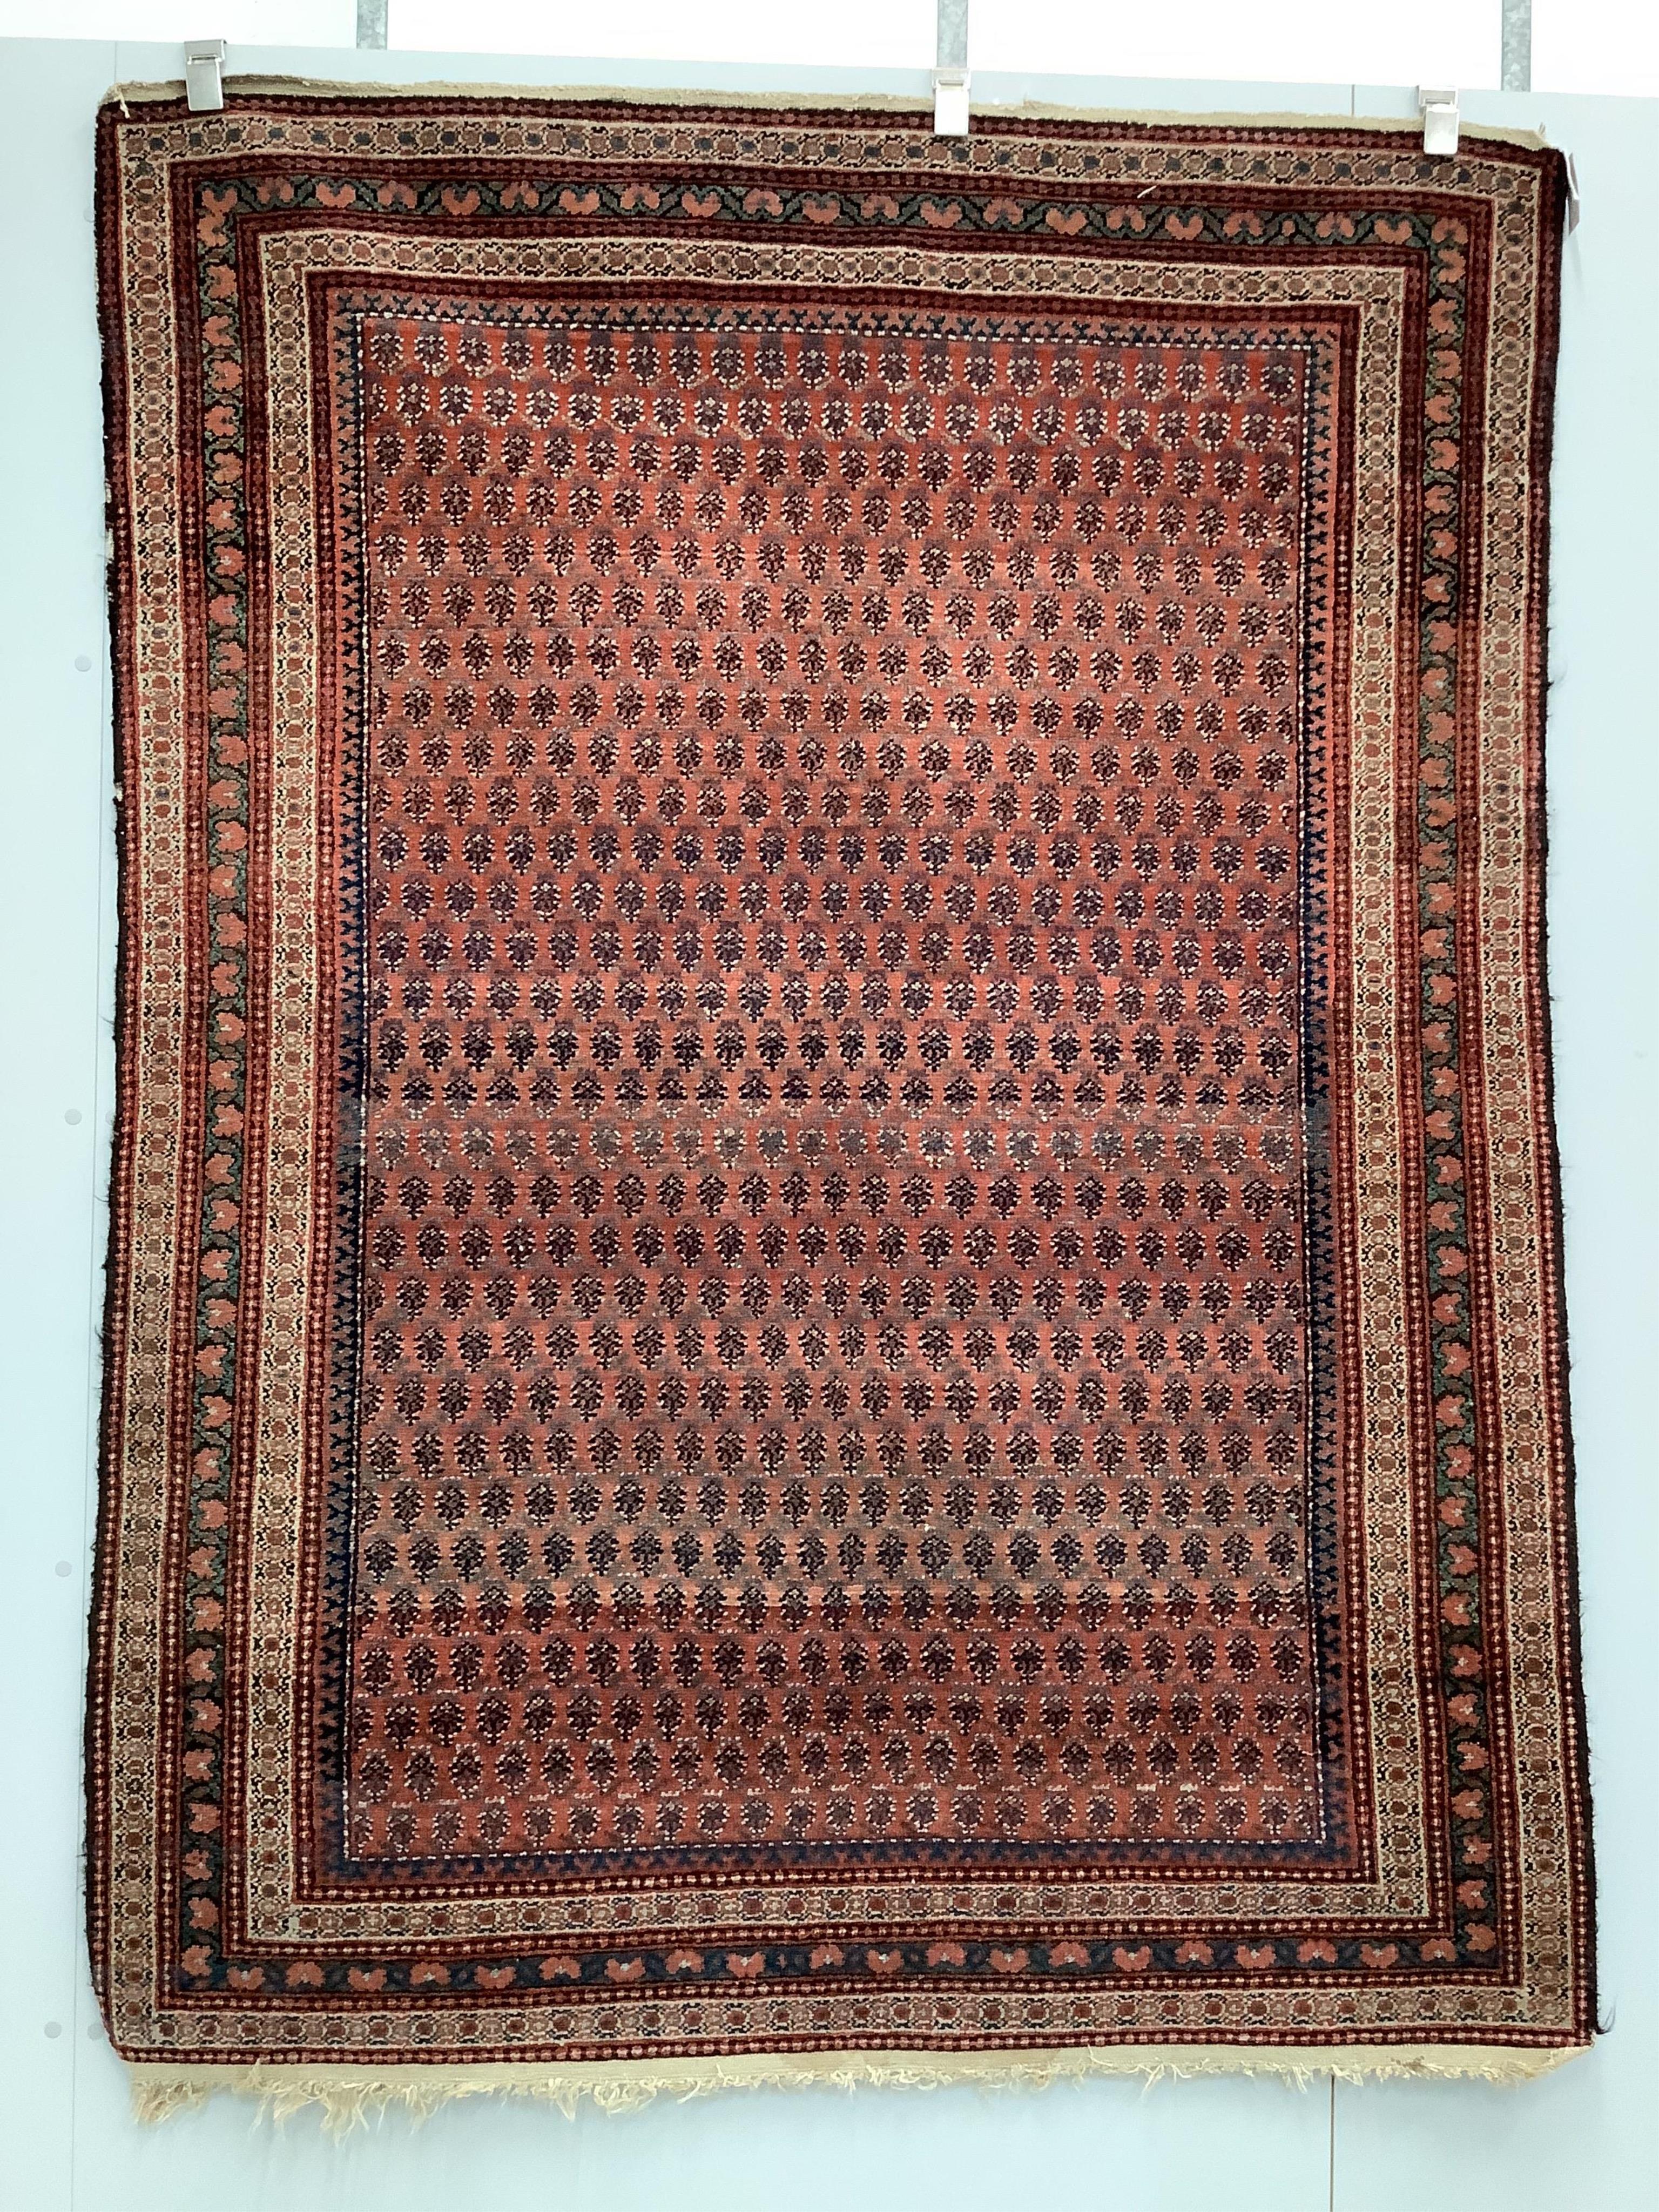 A Saraband pink ground rug, woven with rows of botehs, 190 x 144cm. Condition - fair